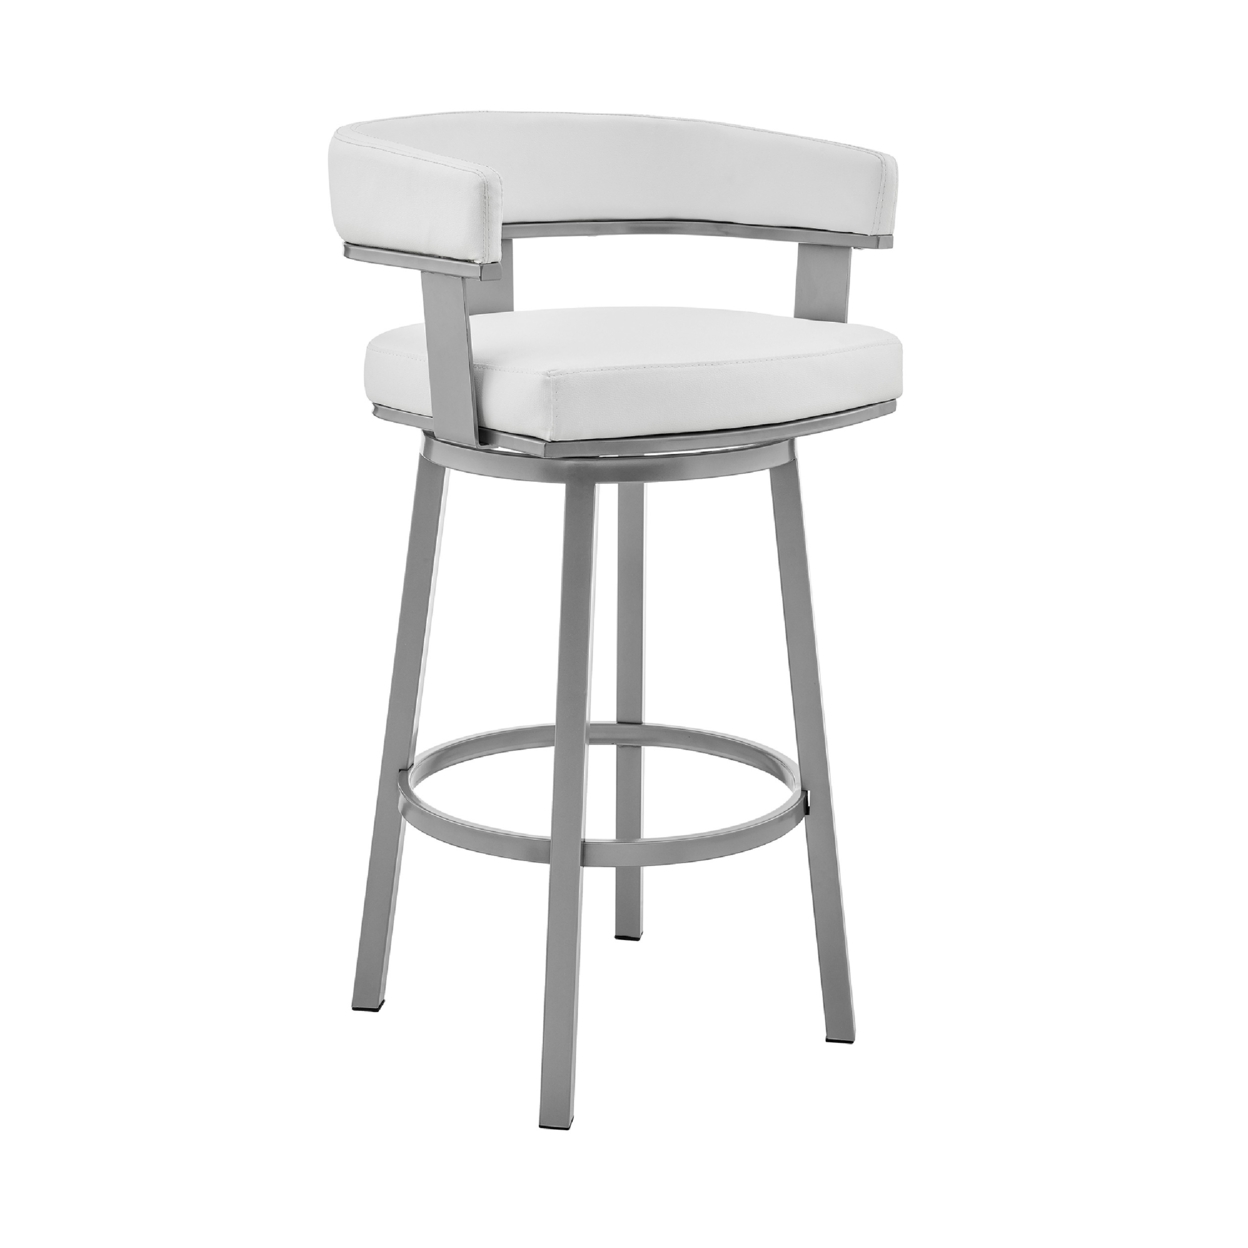 Swivel Barstool With Curved Open Back And Metal Legs, Silver And White- Saltoro Sherpi